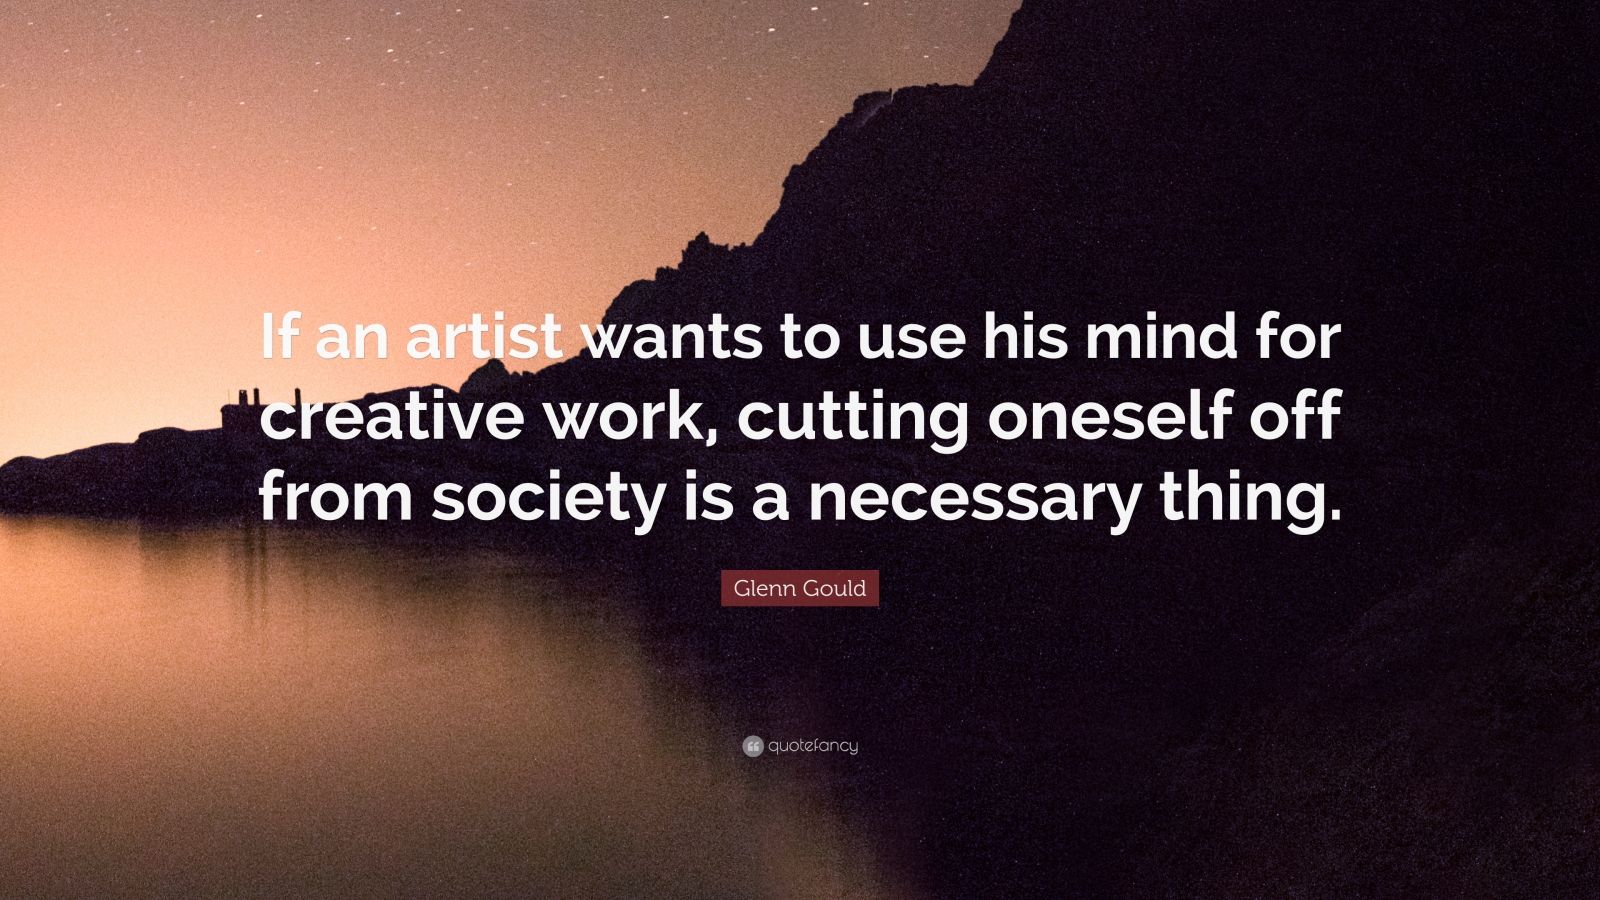 Glenn Gould Quote “If an artist wants to use his mind for